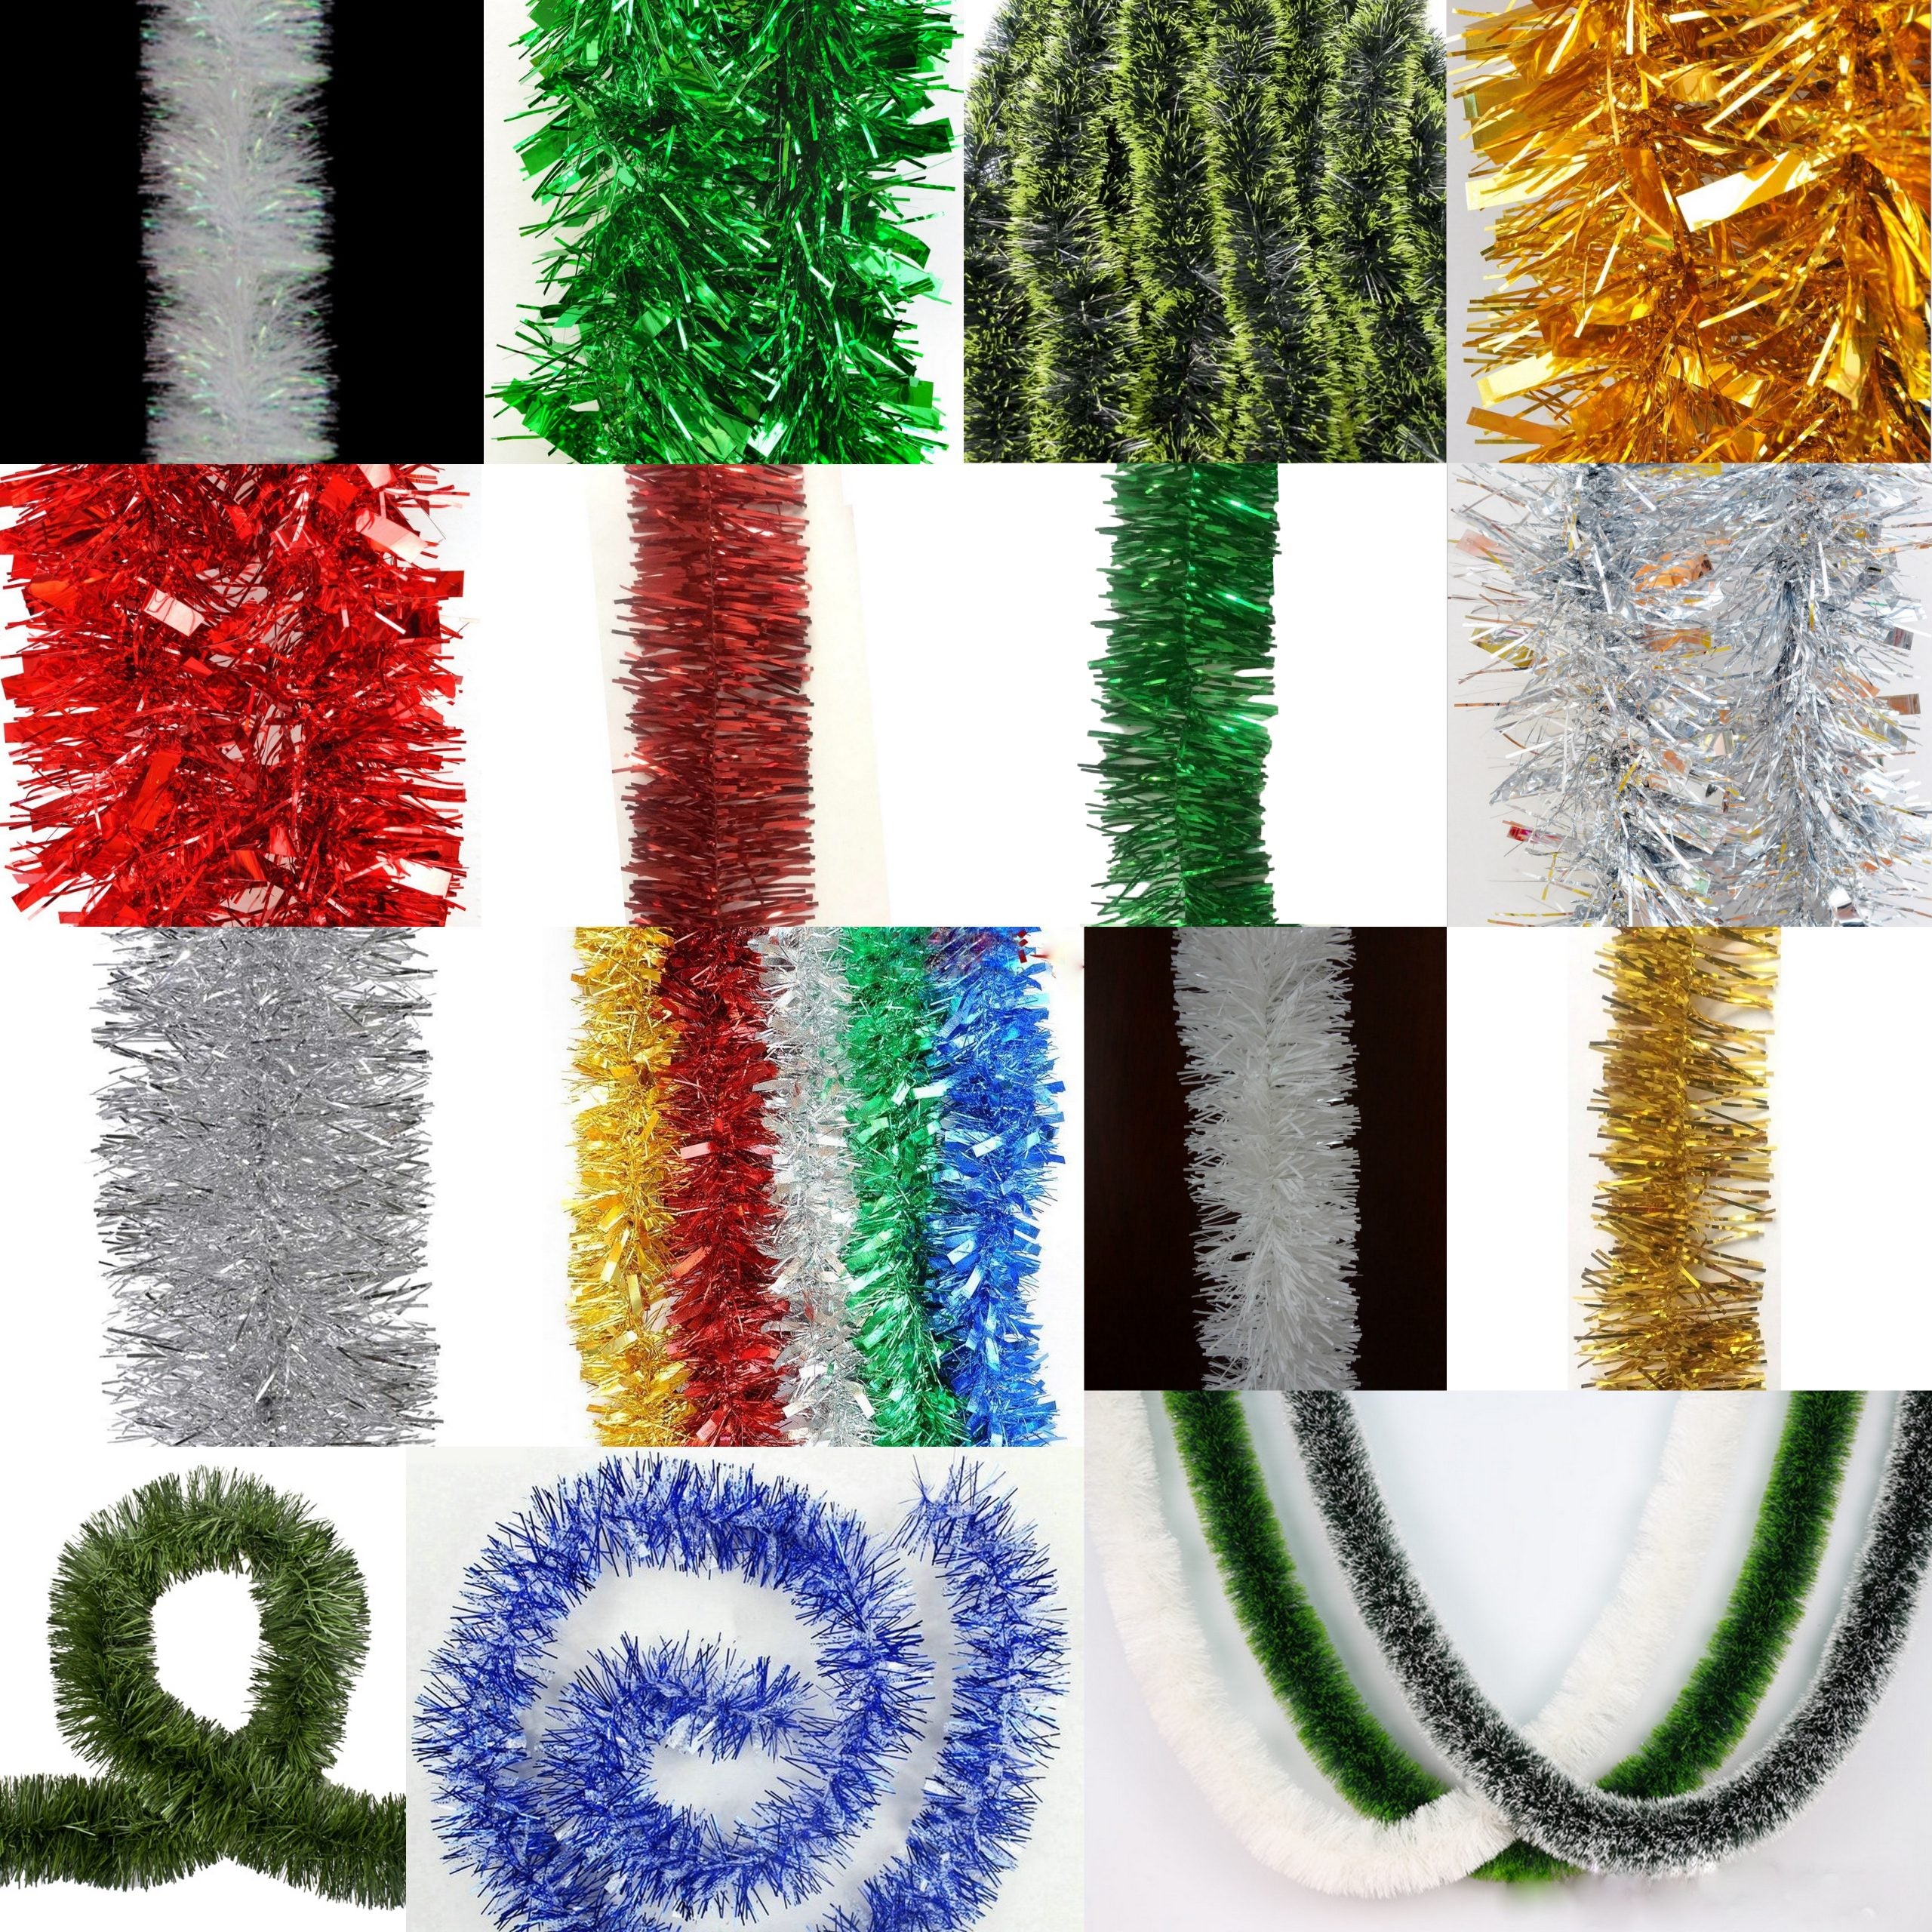 5x 2.5m Christmas Tinsel Xmas Garland Sparkly Snowflake Party Natural Home Décor, Crinkle Cut (Blue Silver)